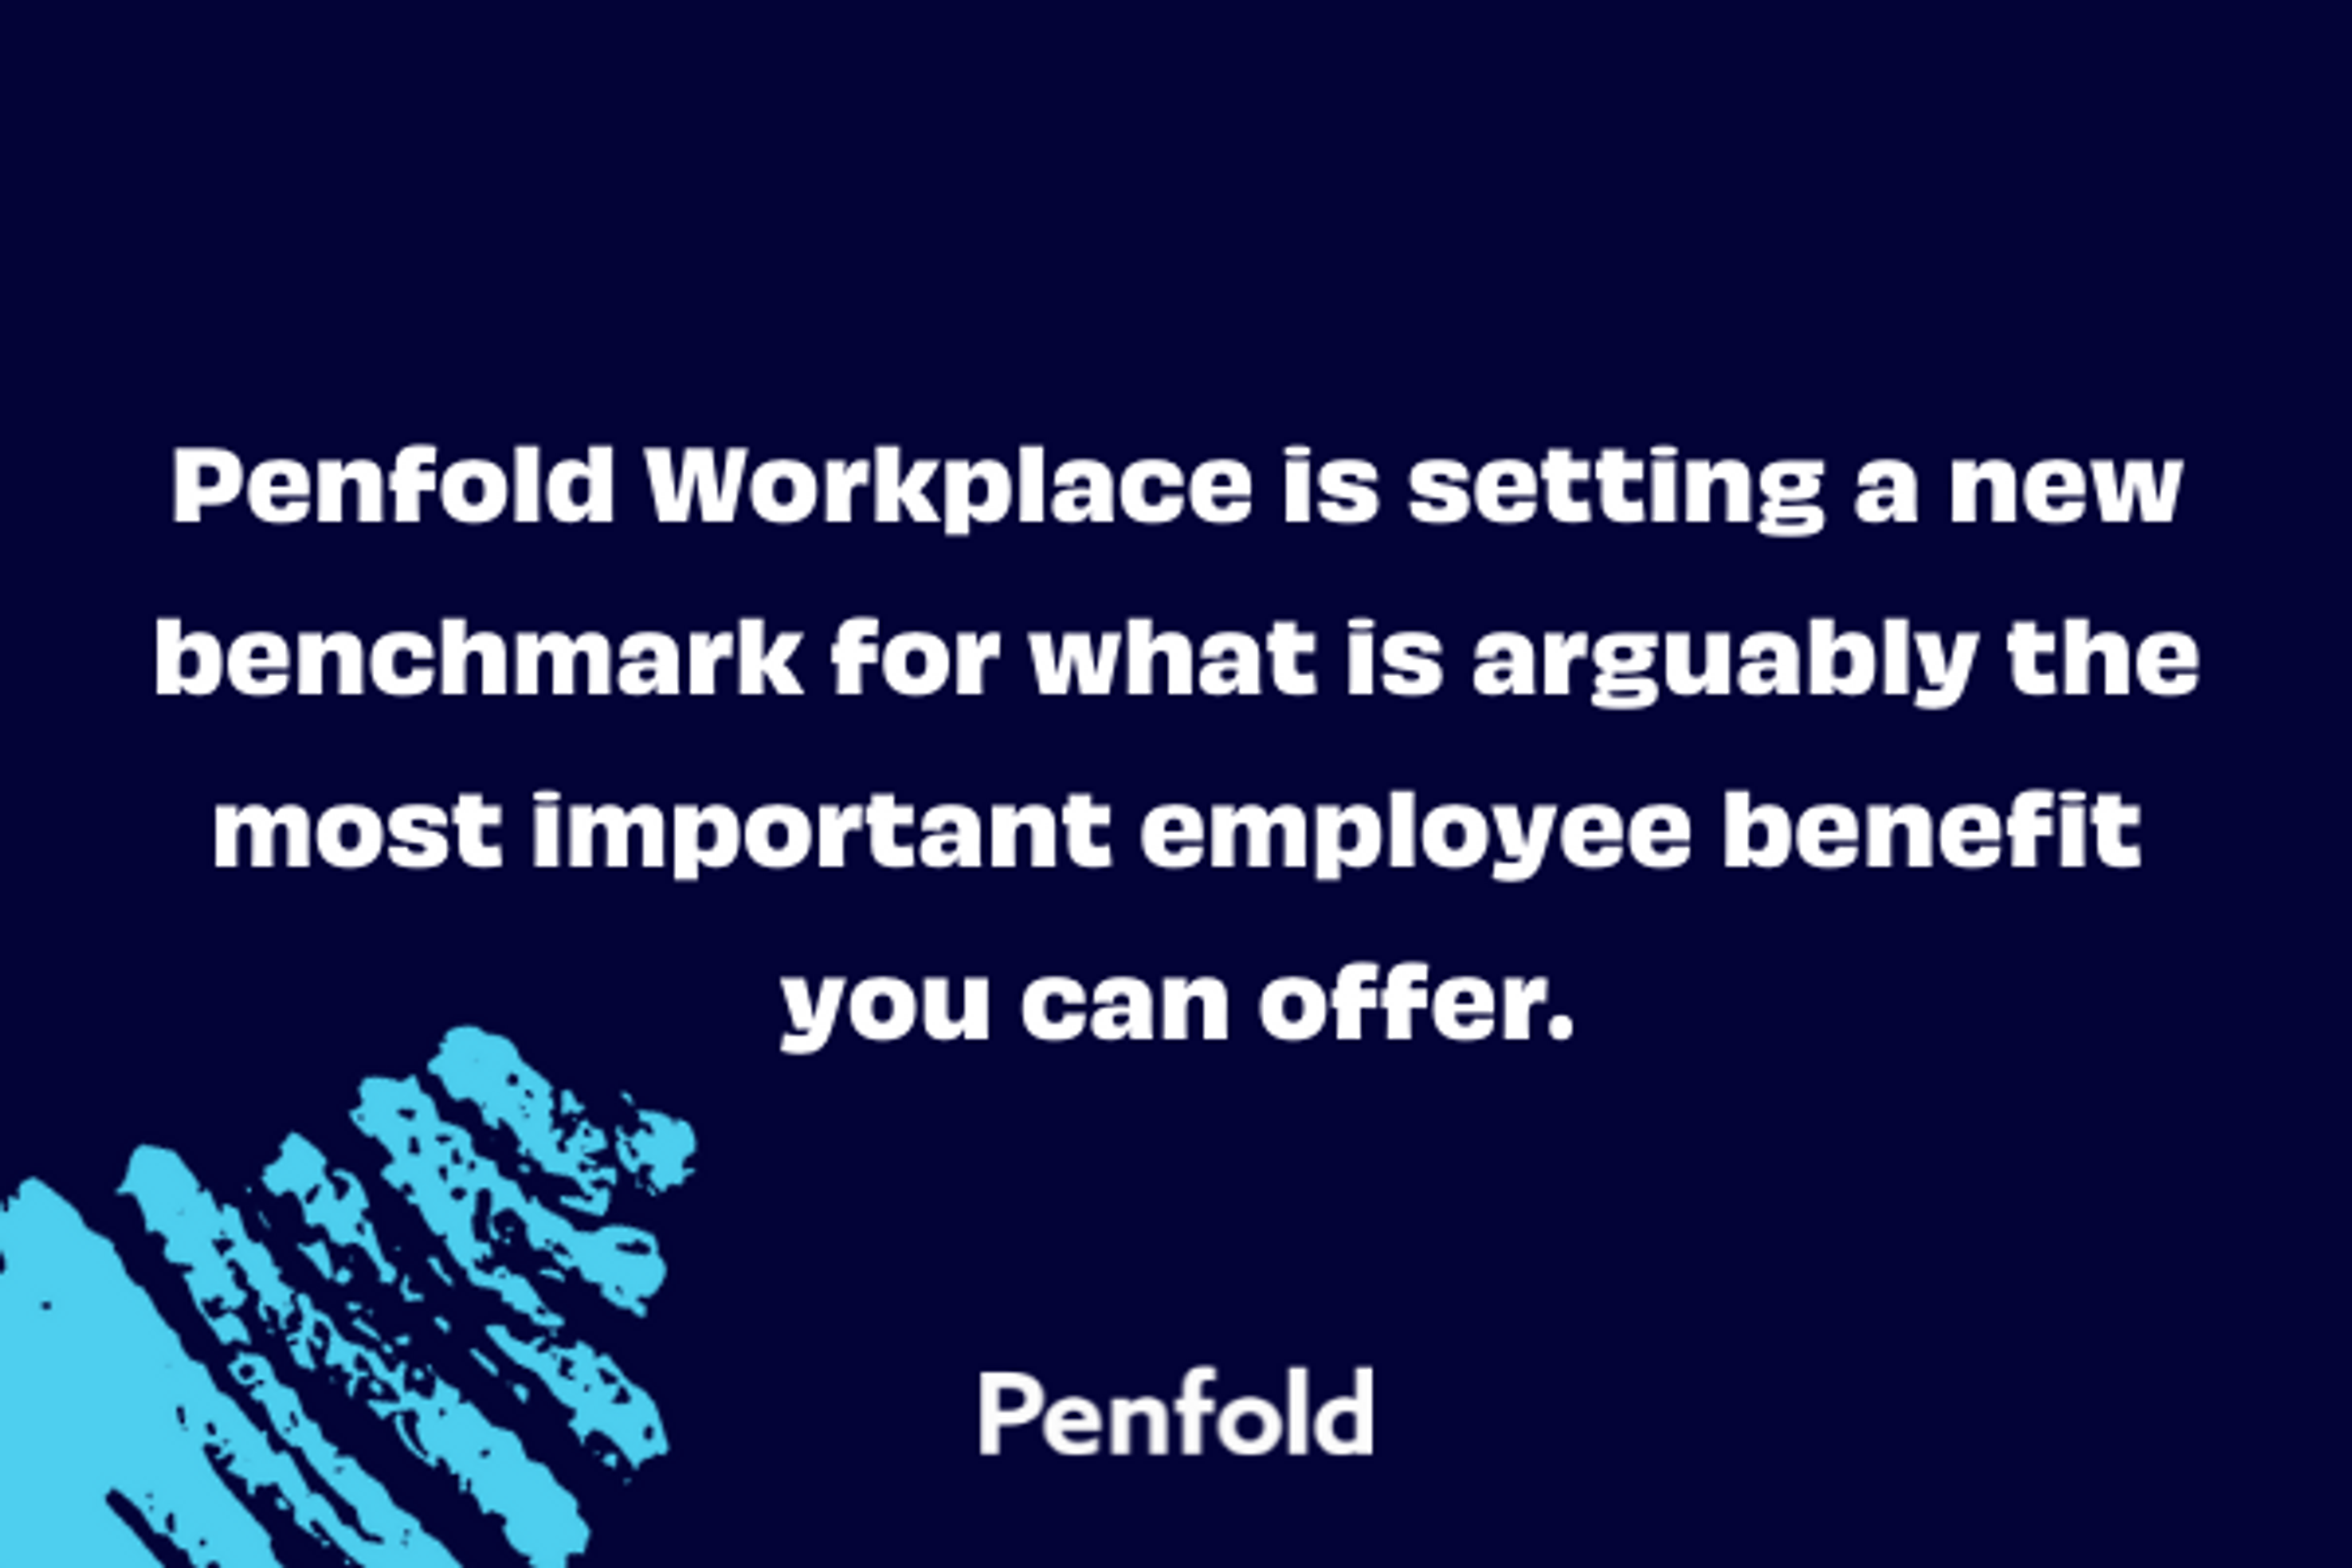 Quote stating 'Penfold Workplace is setting a new benchmark for what is arguably the most important employee benefit you can offer.'